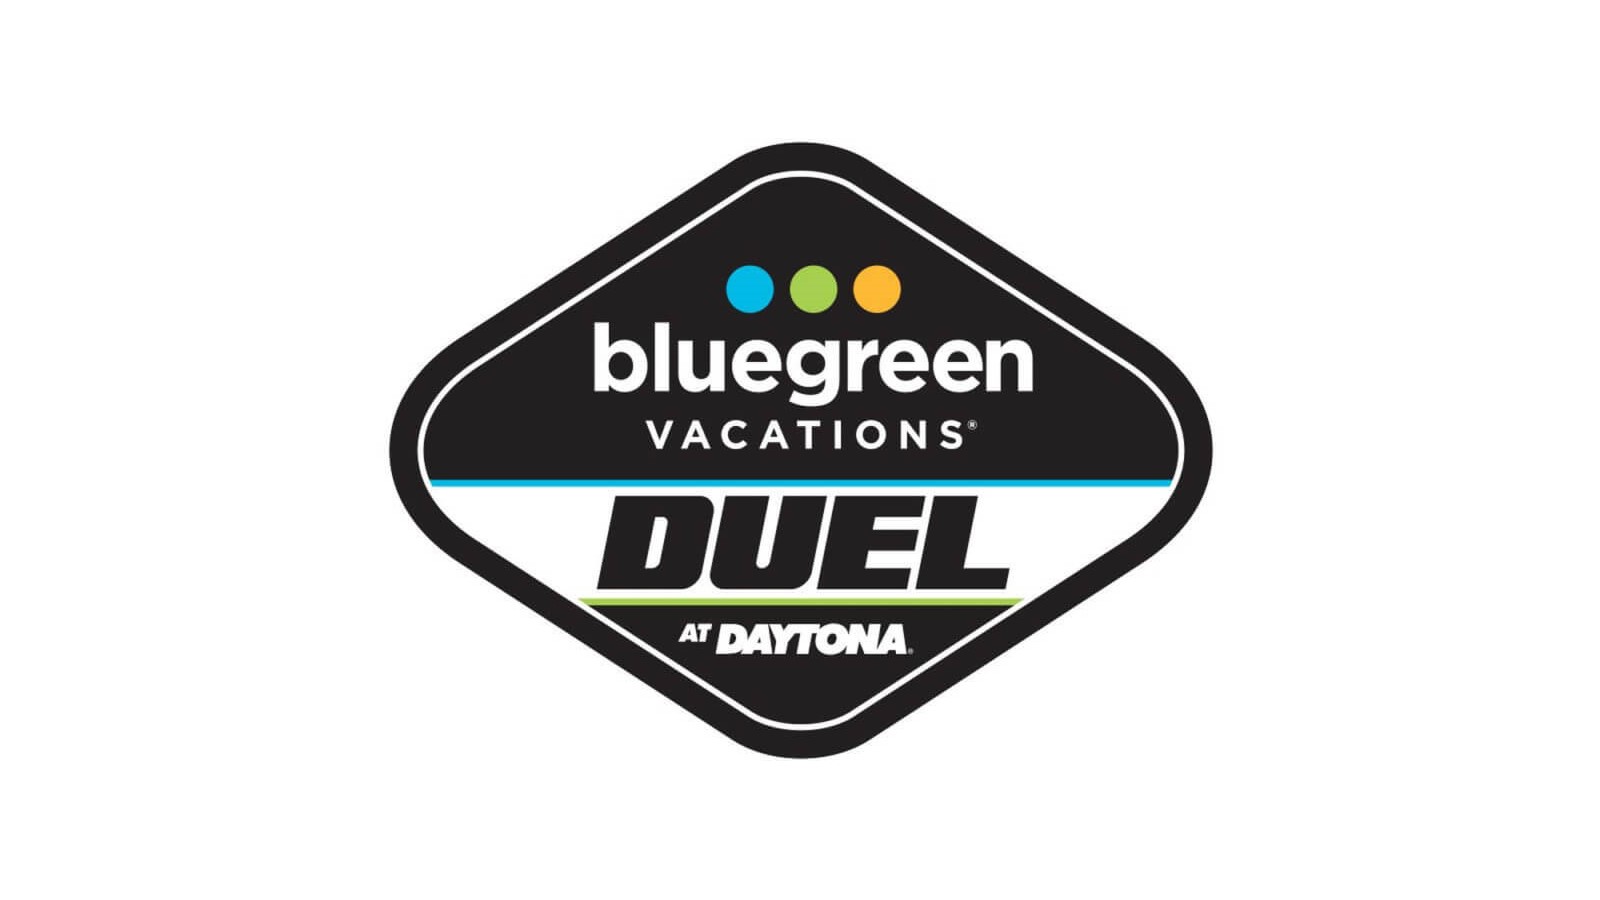 How to Watch Bluegreen Vacations Duel 2020 Online